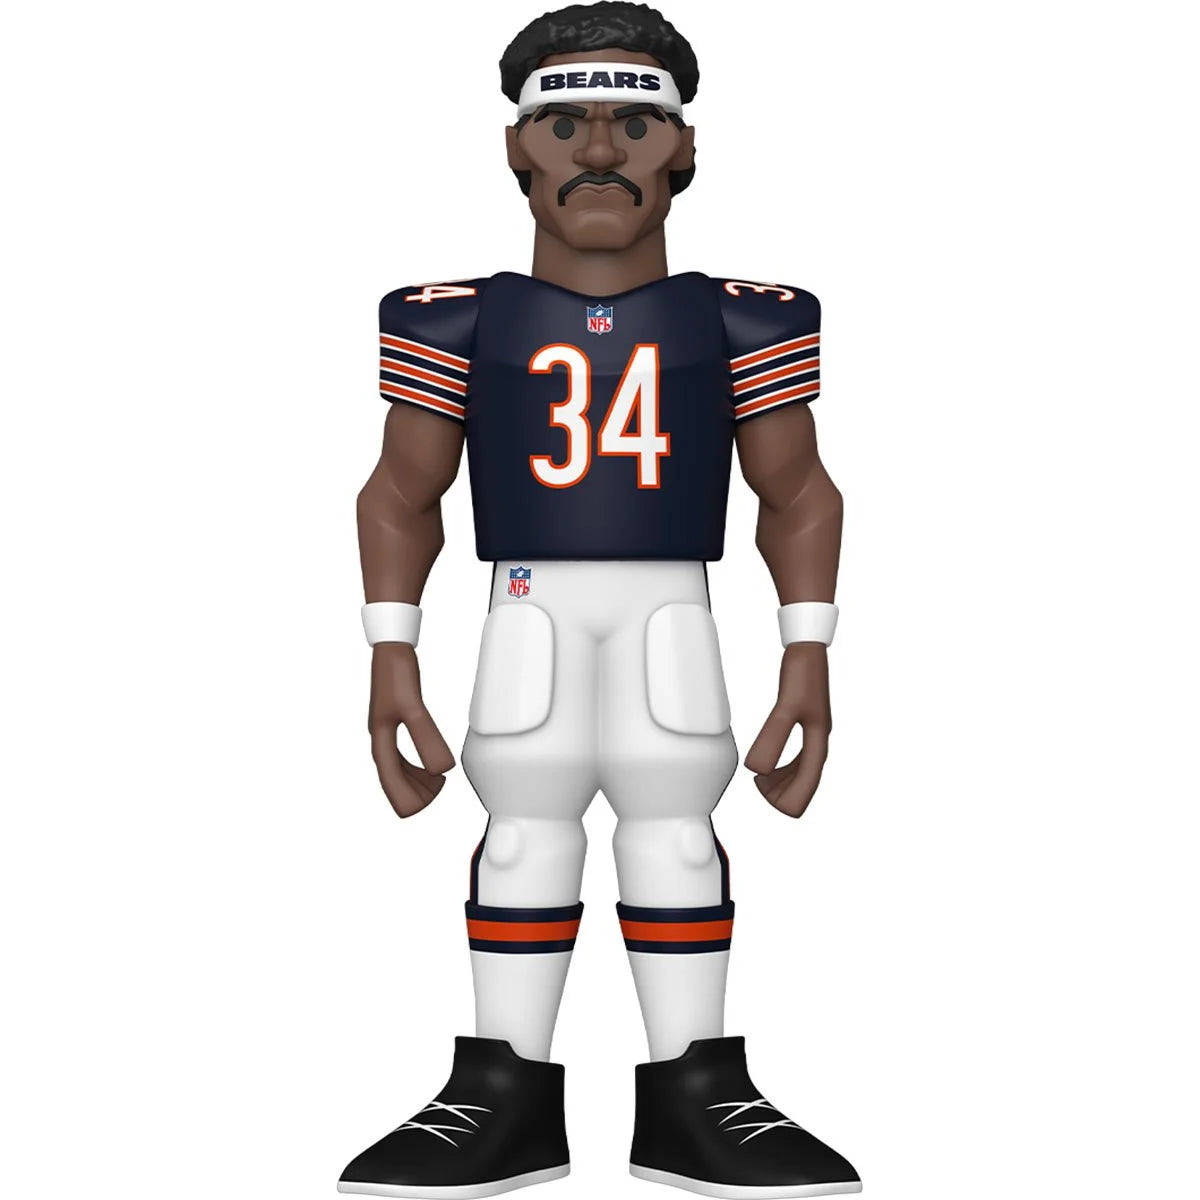 Walter Payton Bears NFL 5-Inch Funko Vinyl Gold Figure  w/ Chance of chase!